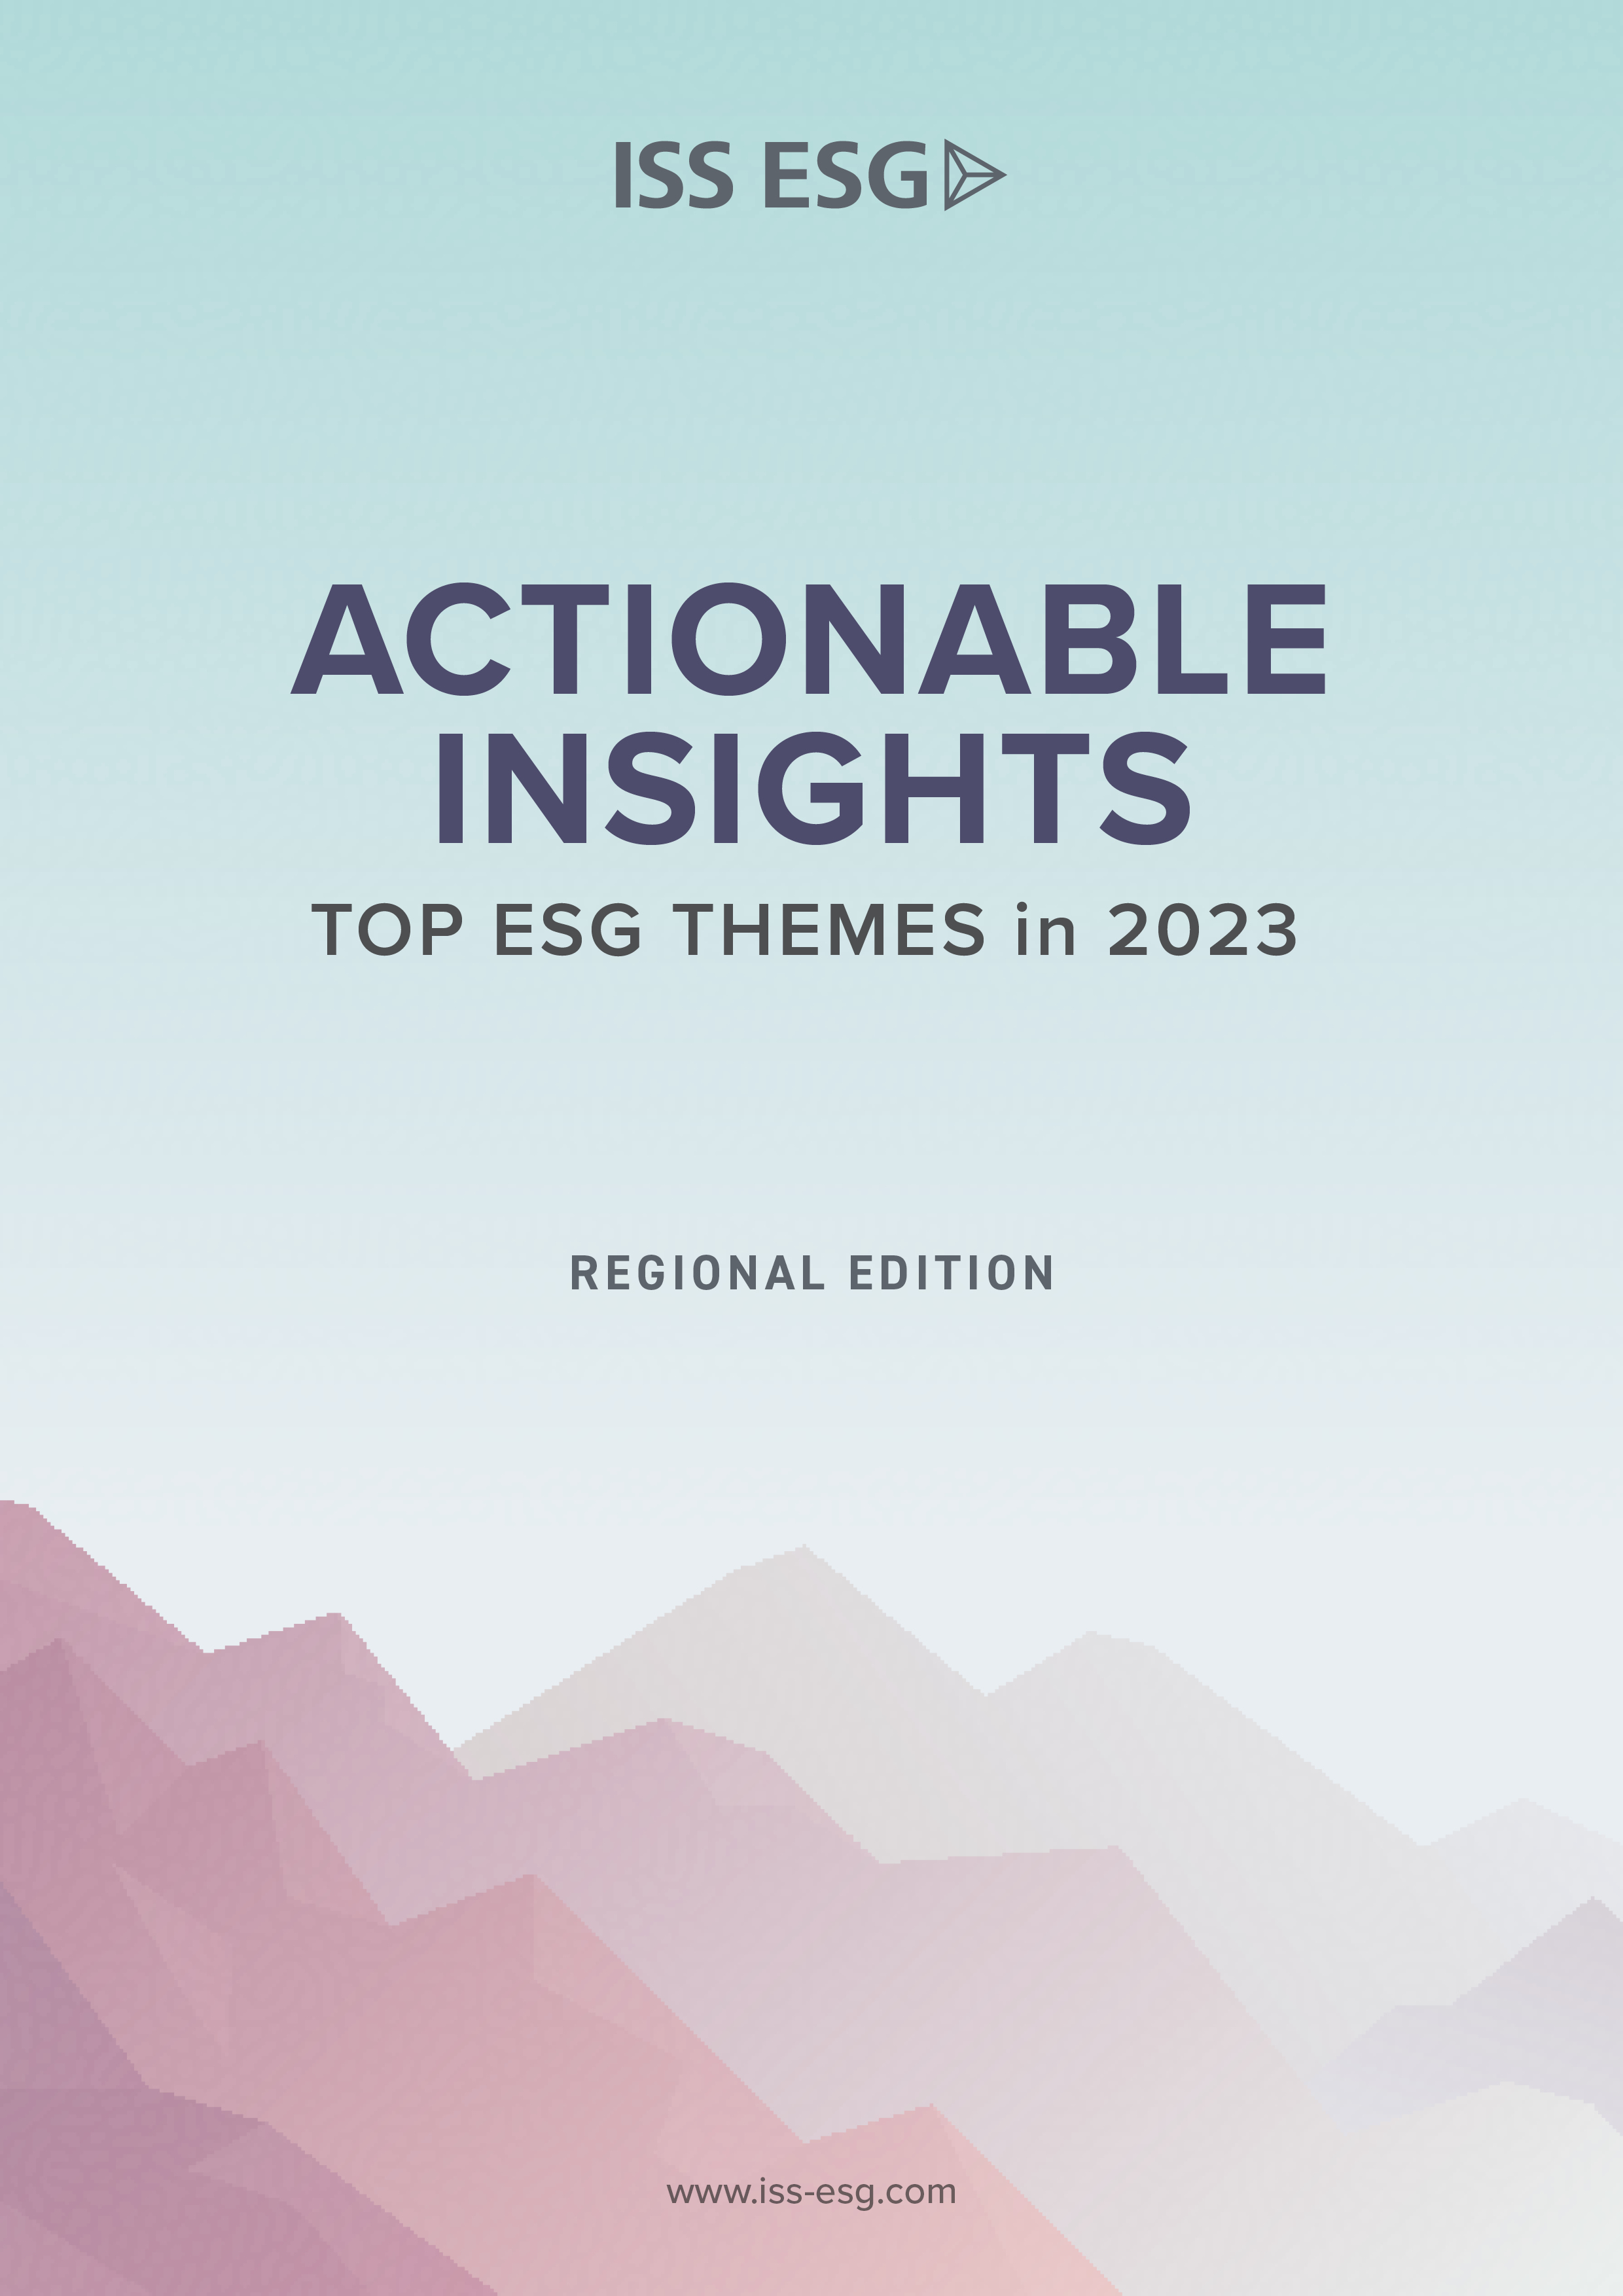 ISS ESG Actionable Insights Top ESG Themes in 2023 Regional cover